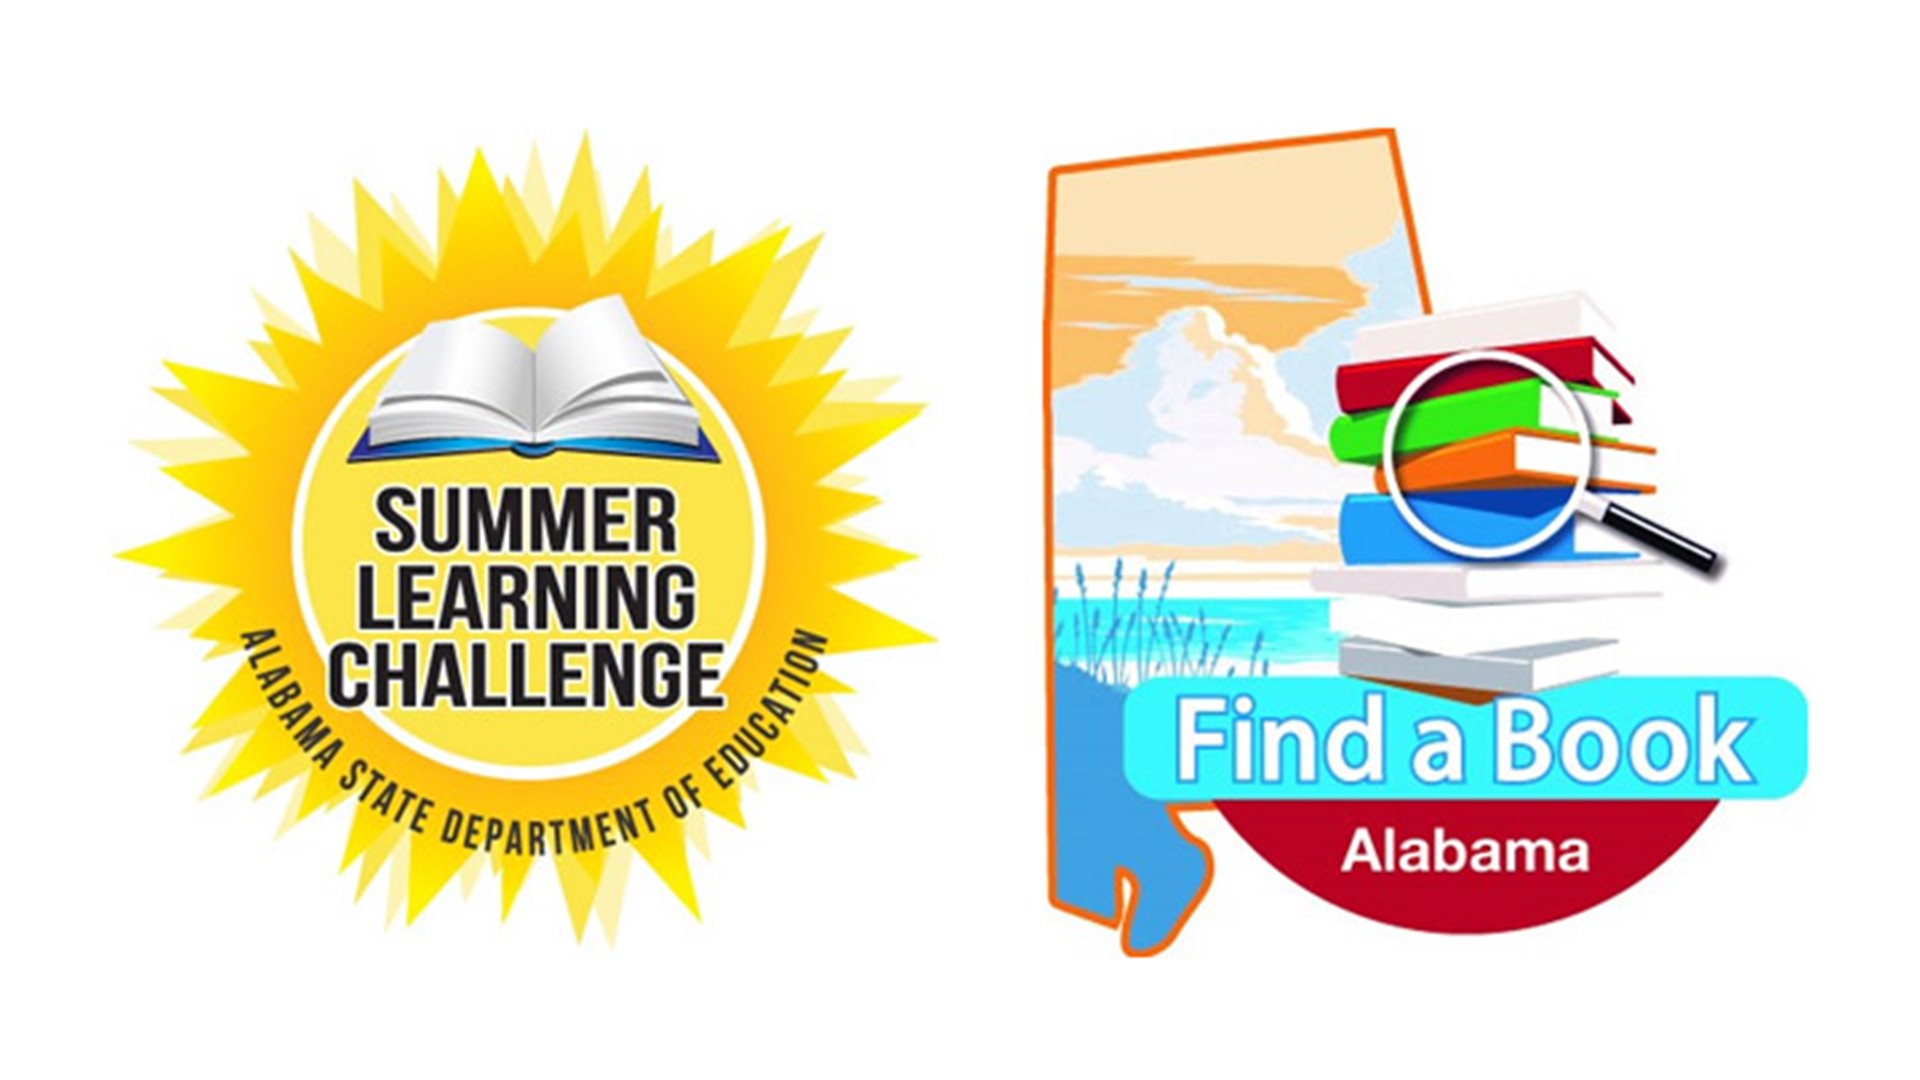 Free summer online classes and books for K12 students